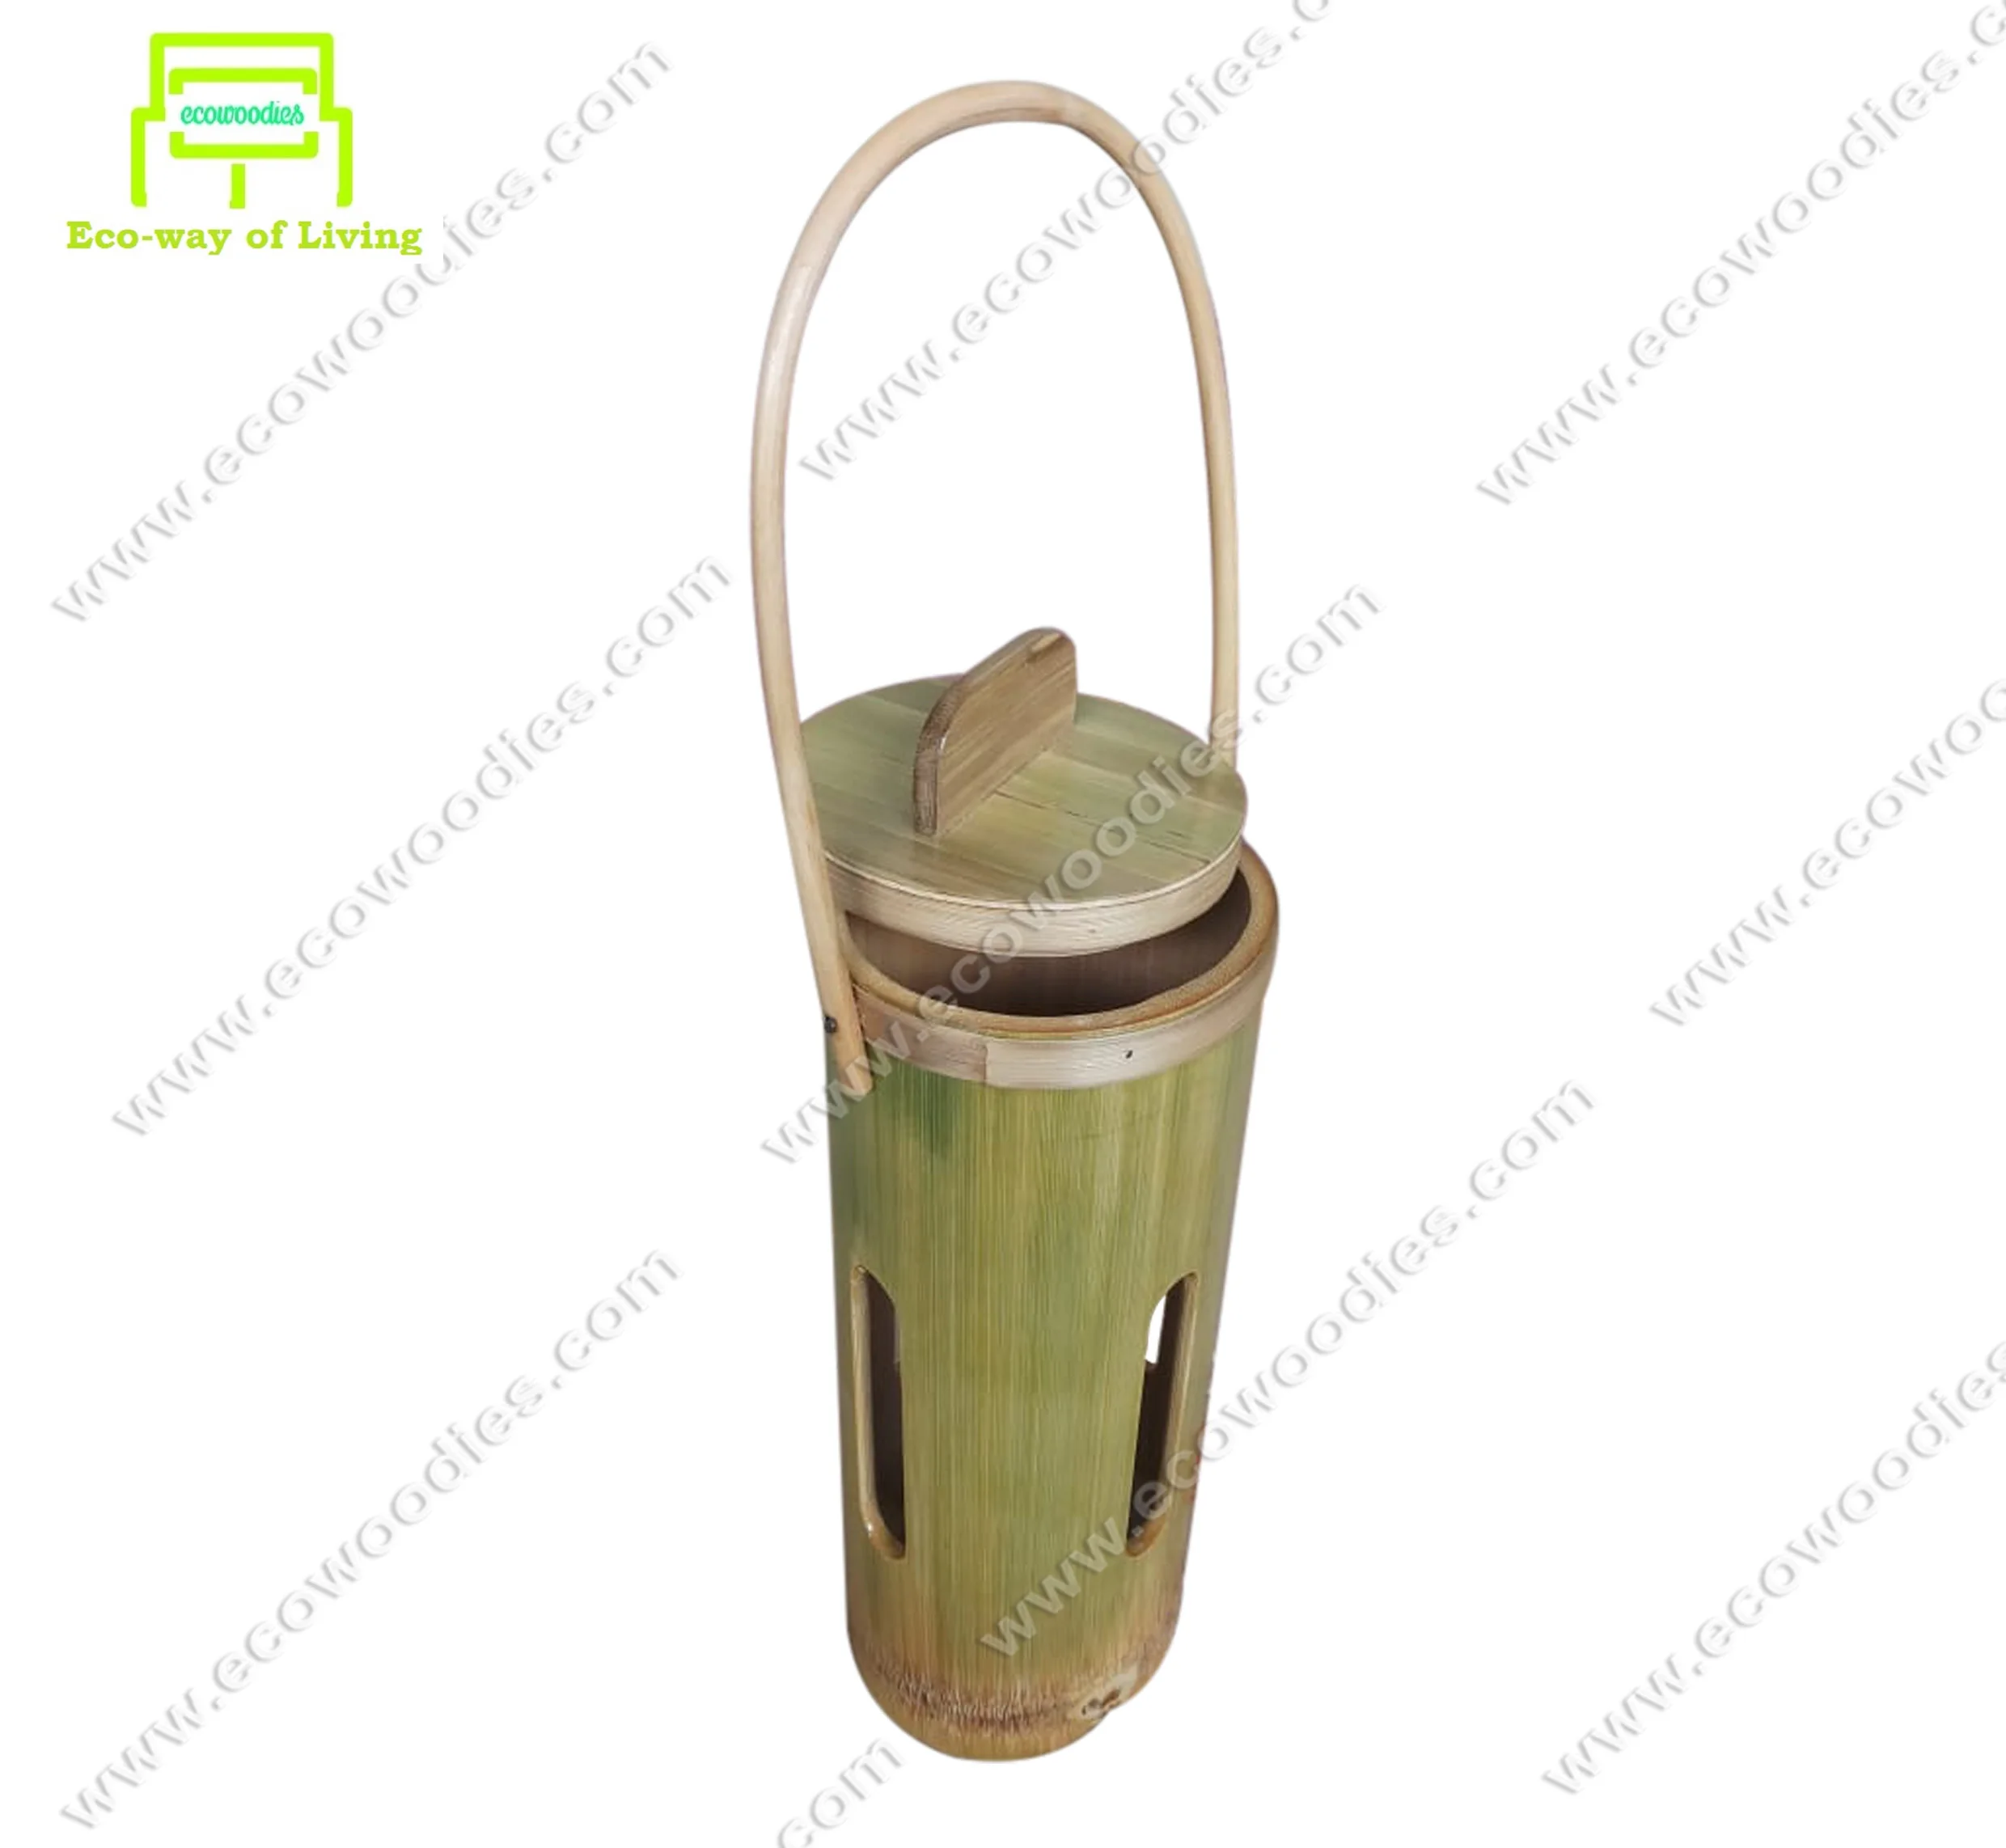 2020 Modern Hanging Ceiling LED Lamp with Lid can be used Table Top made from ecofriendly Bamboo ideal for Resort Restaurant